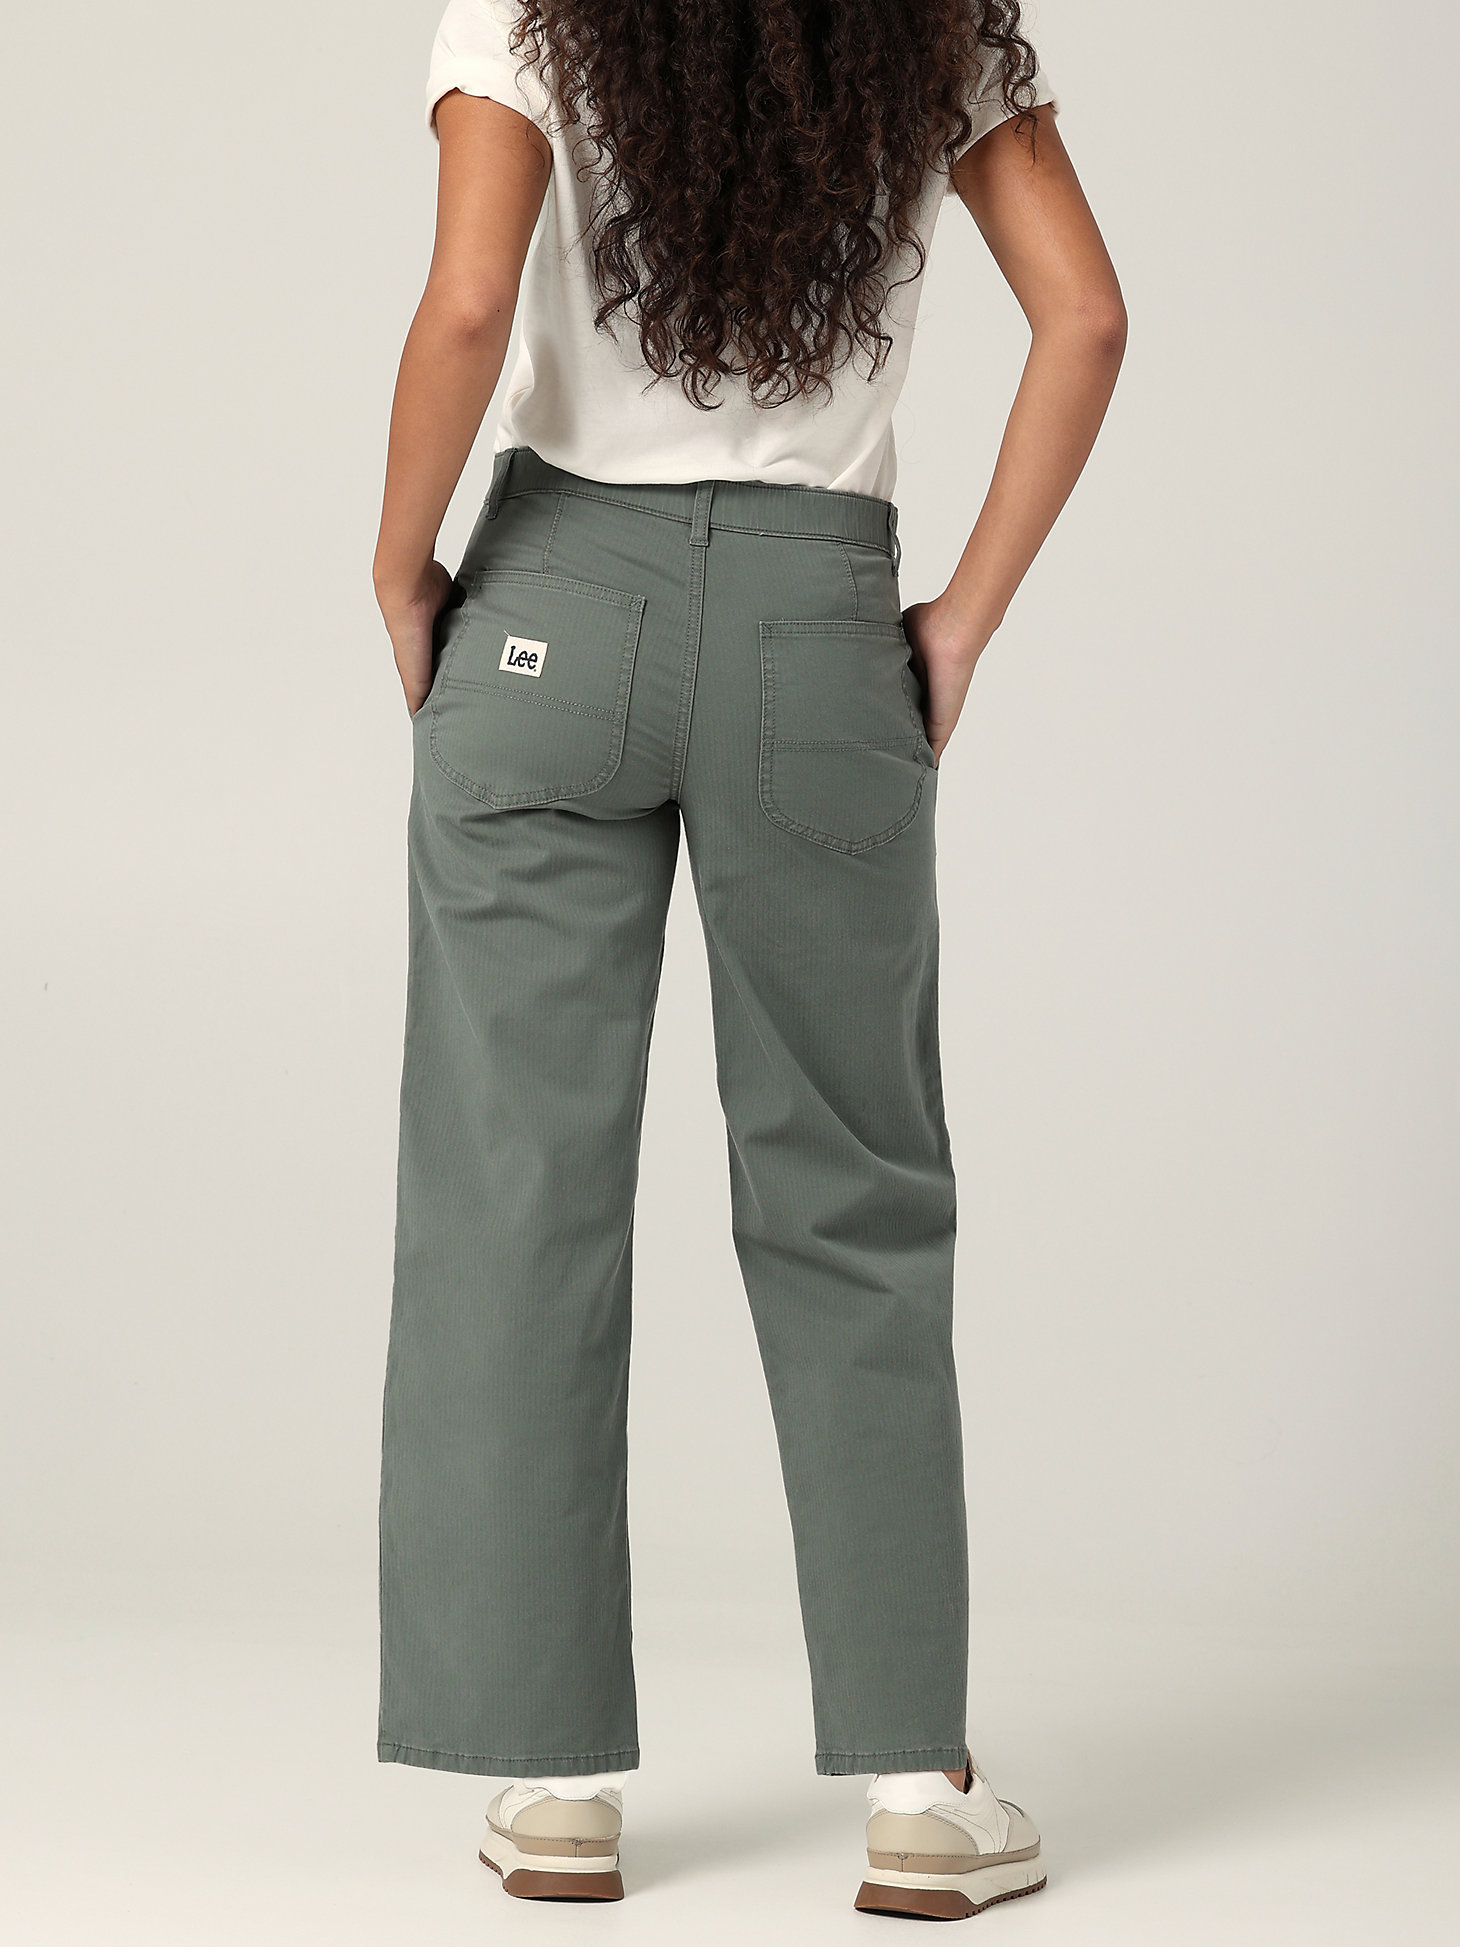 Women's Ultra Lux Relaxed Straight Pant in Fort Green alternative view 1